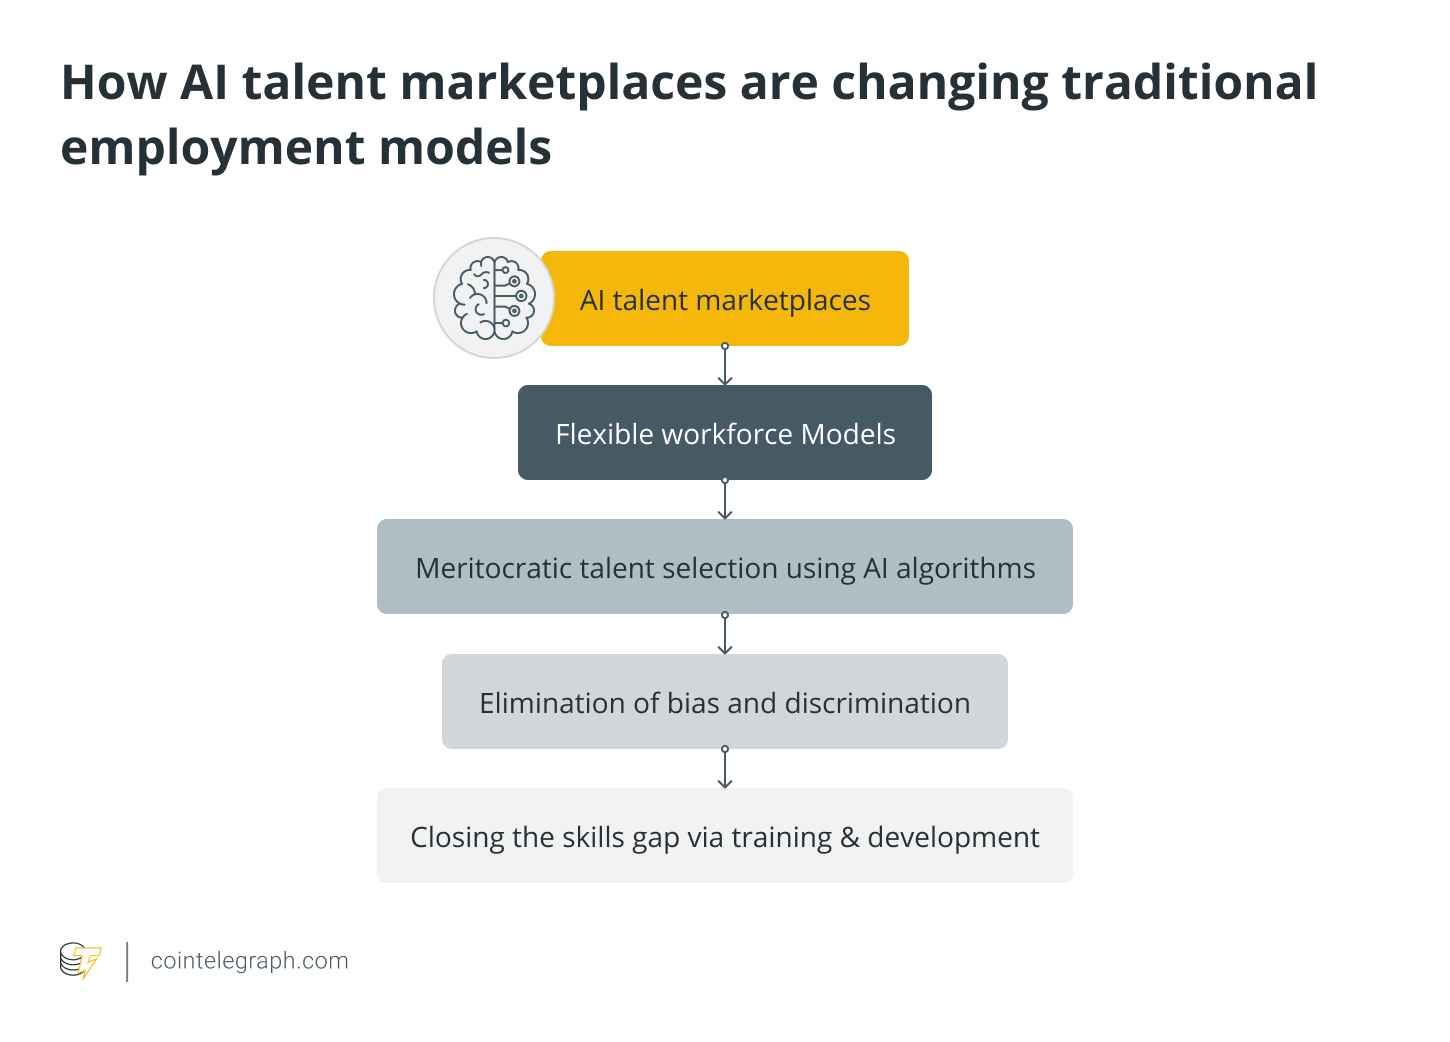 How AI talent marketplaces are changing traditional employment models